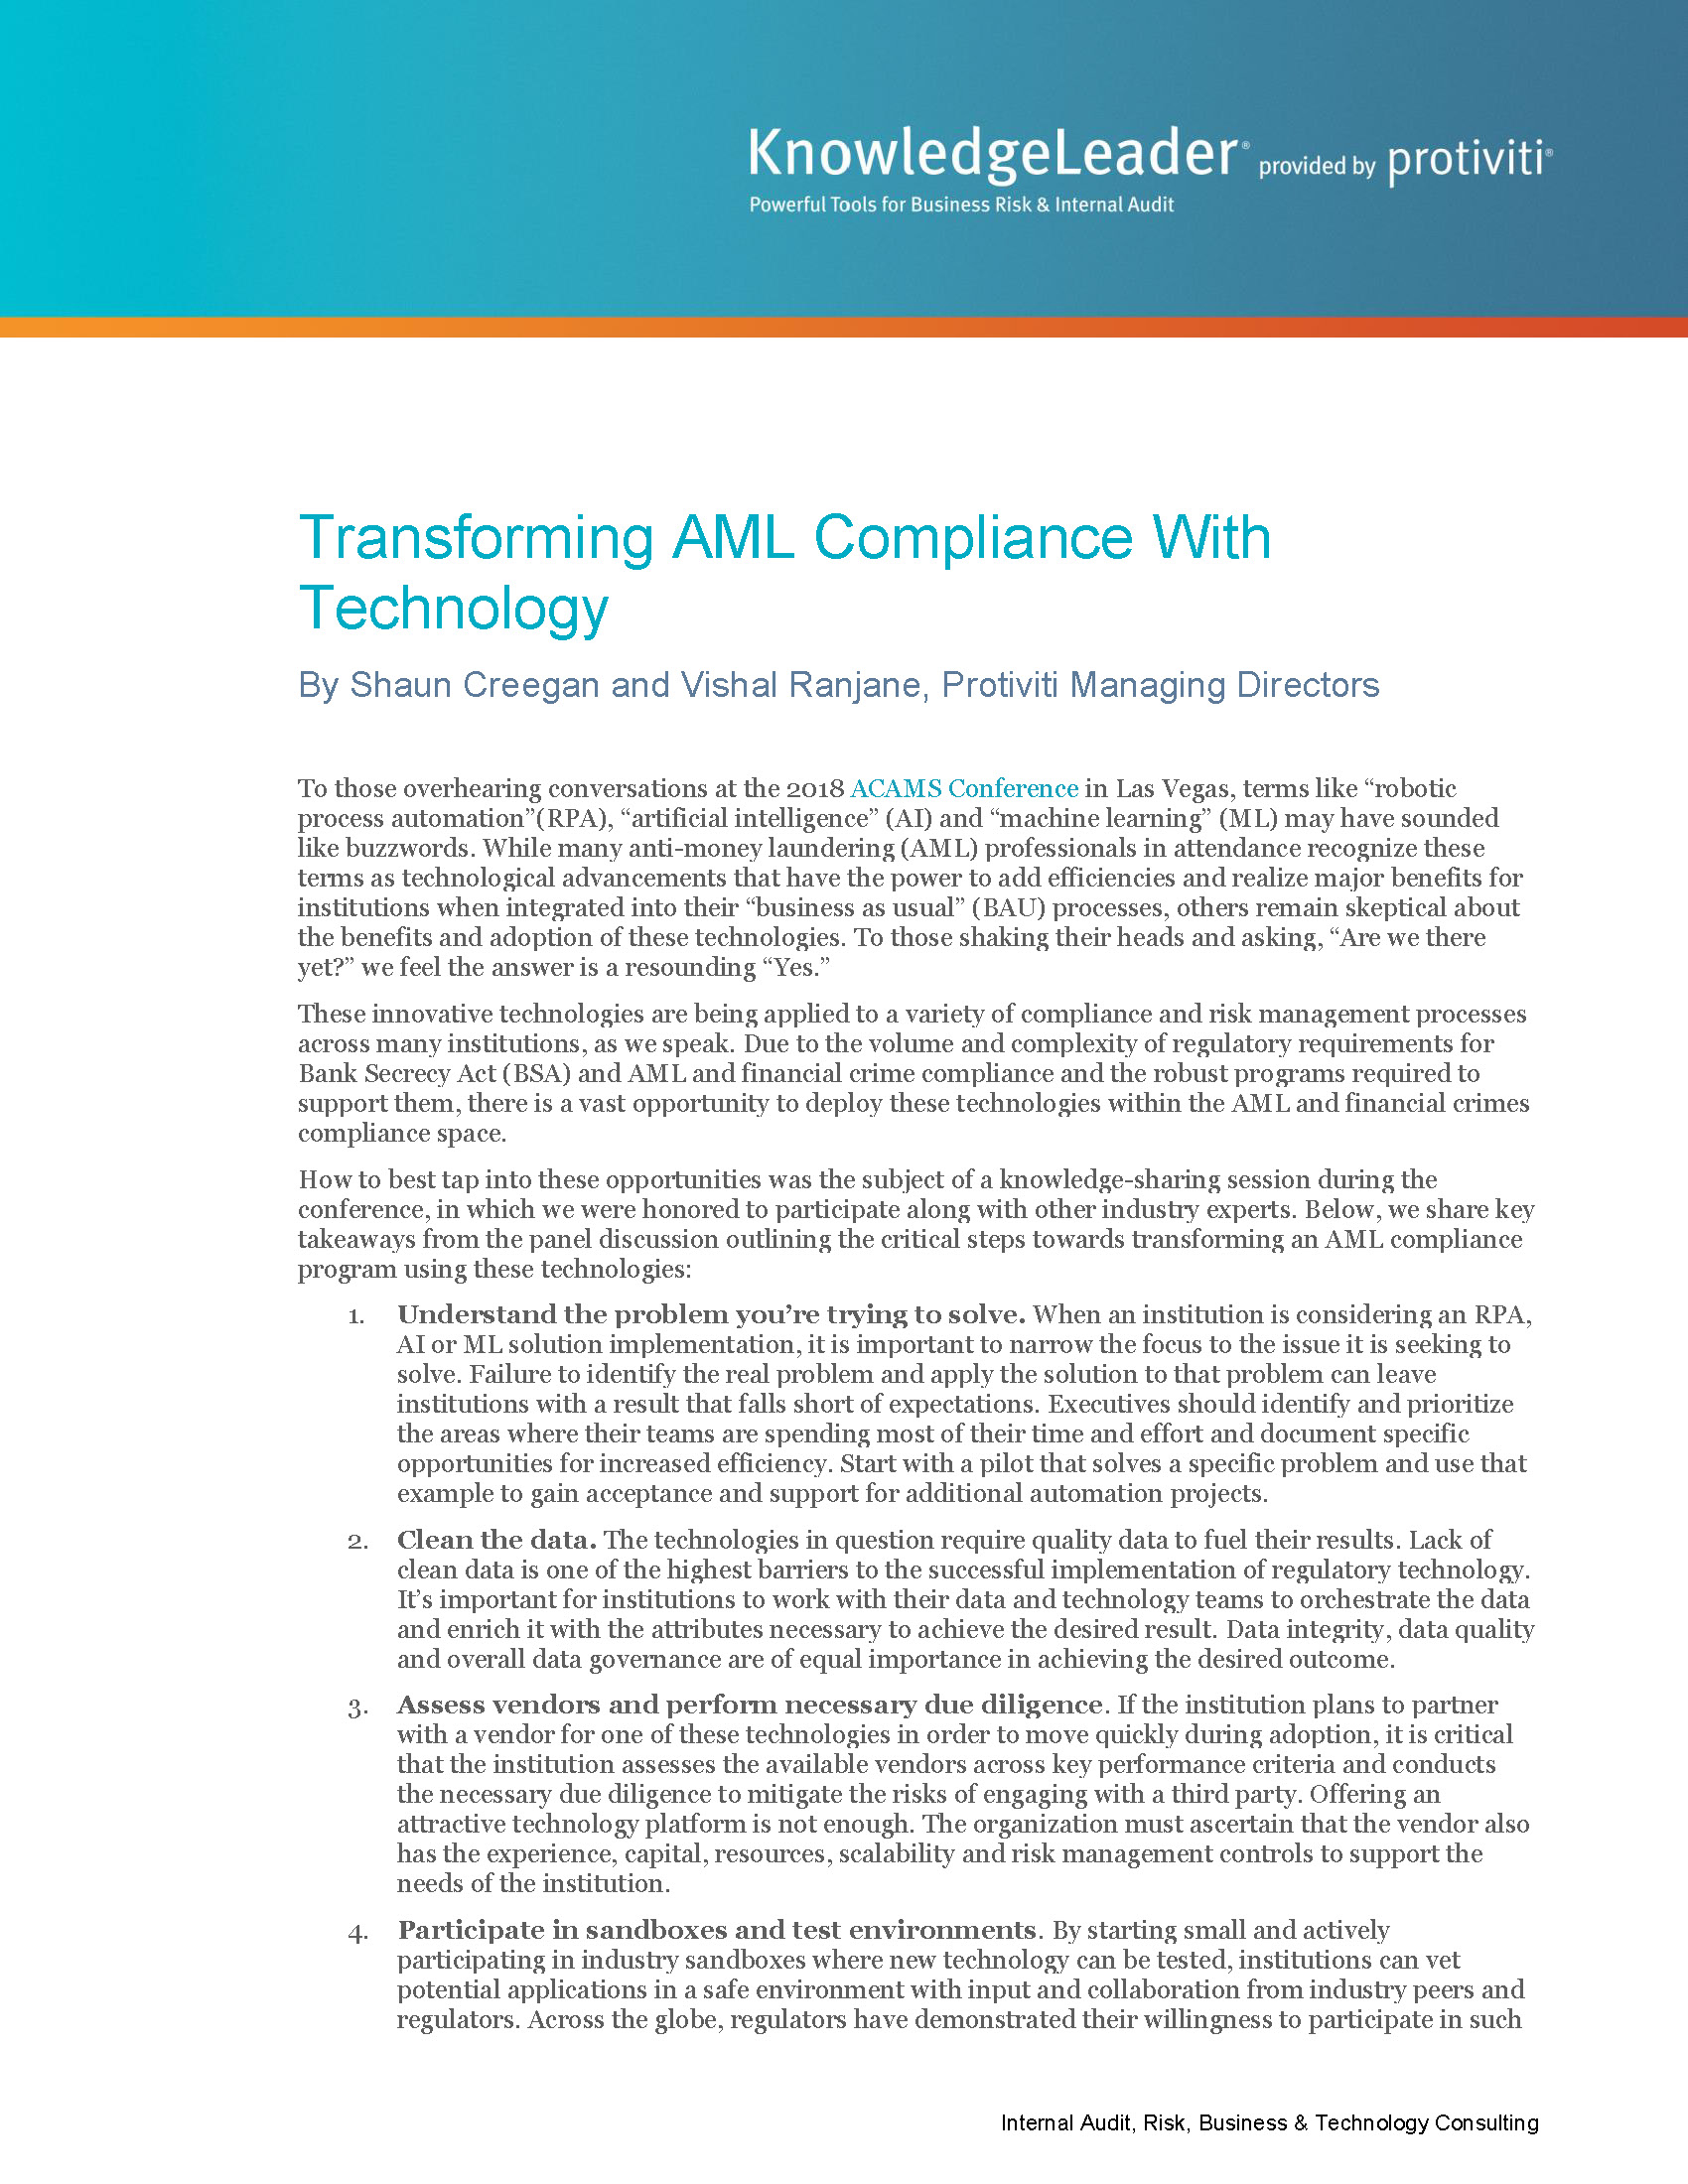 Screenshot of the first page of Transforming AML Compliance With Technology